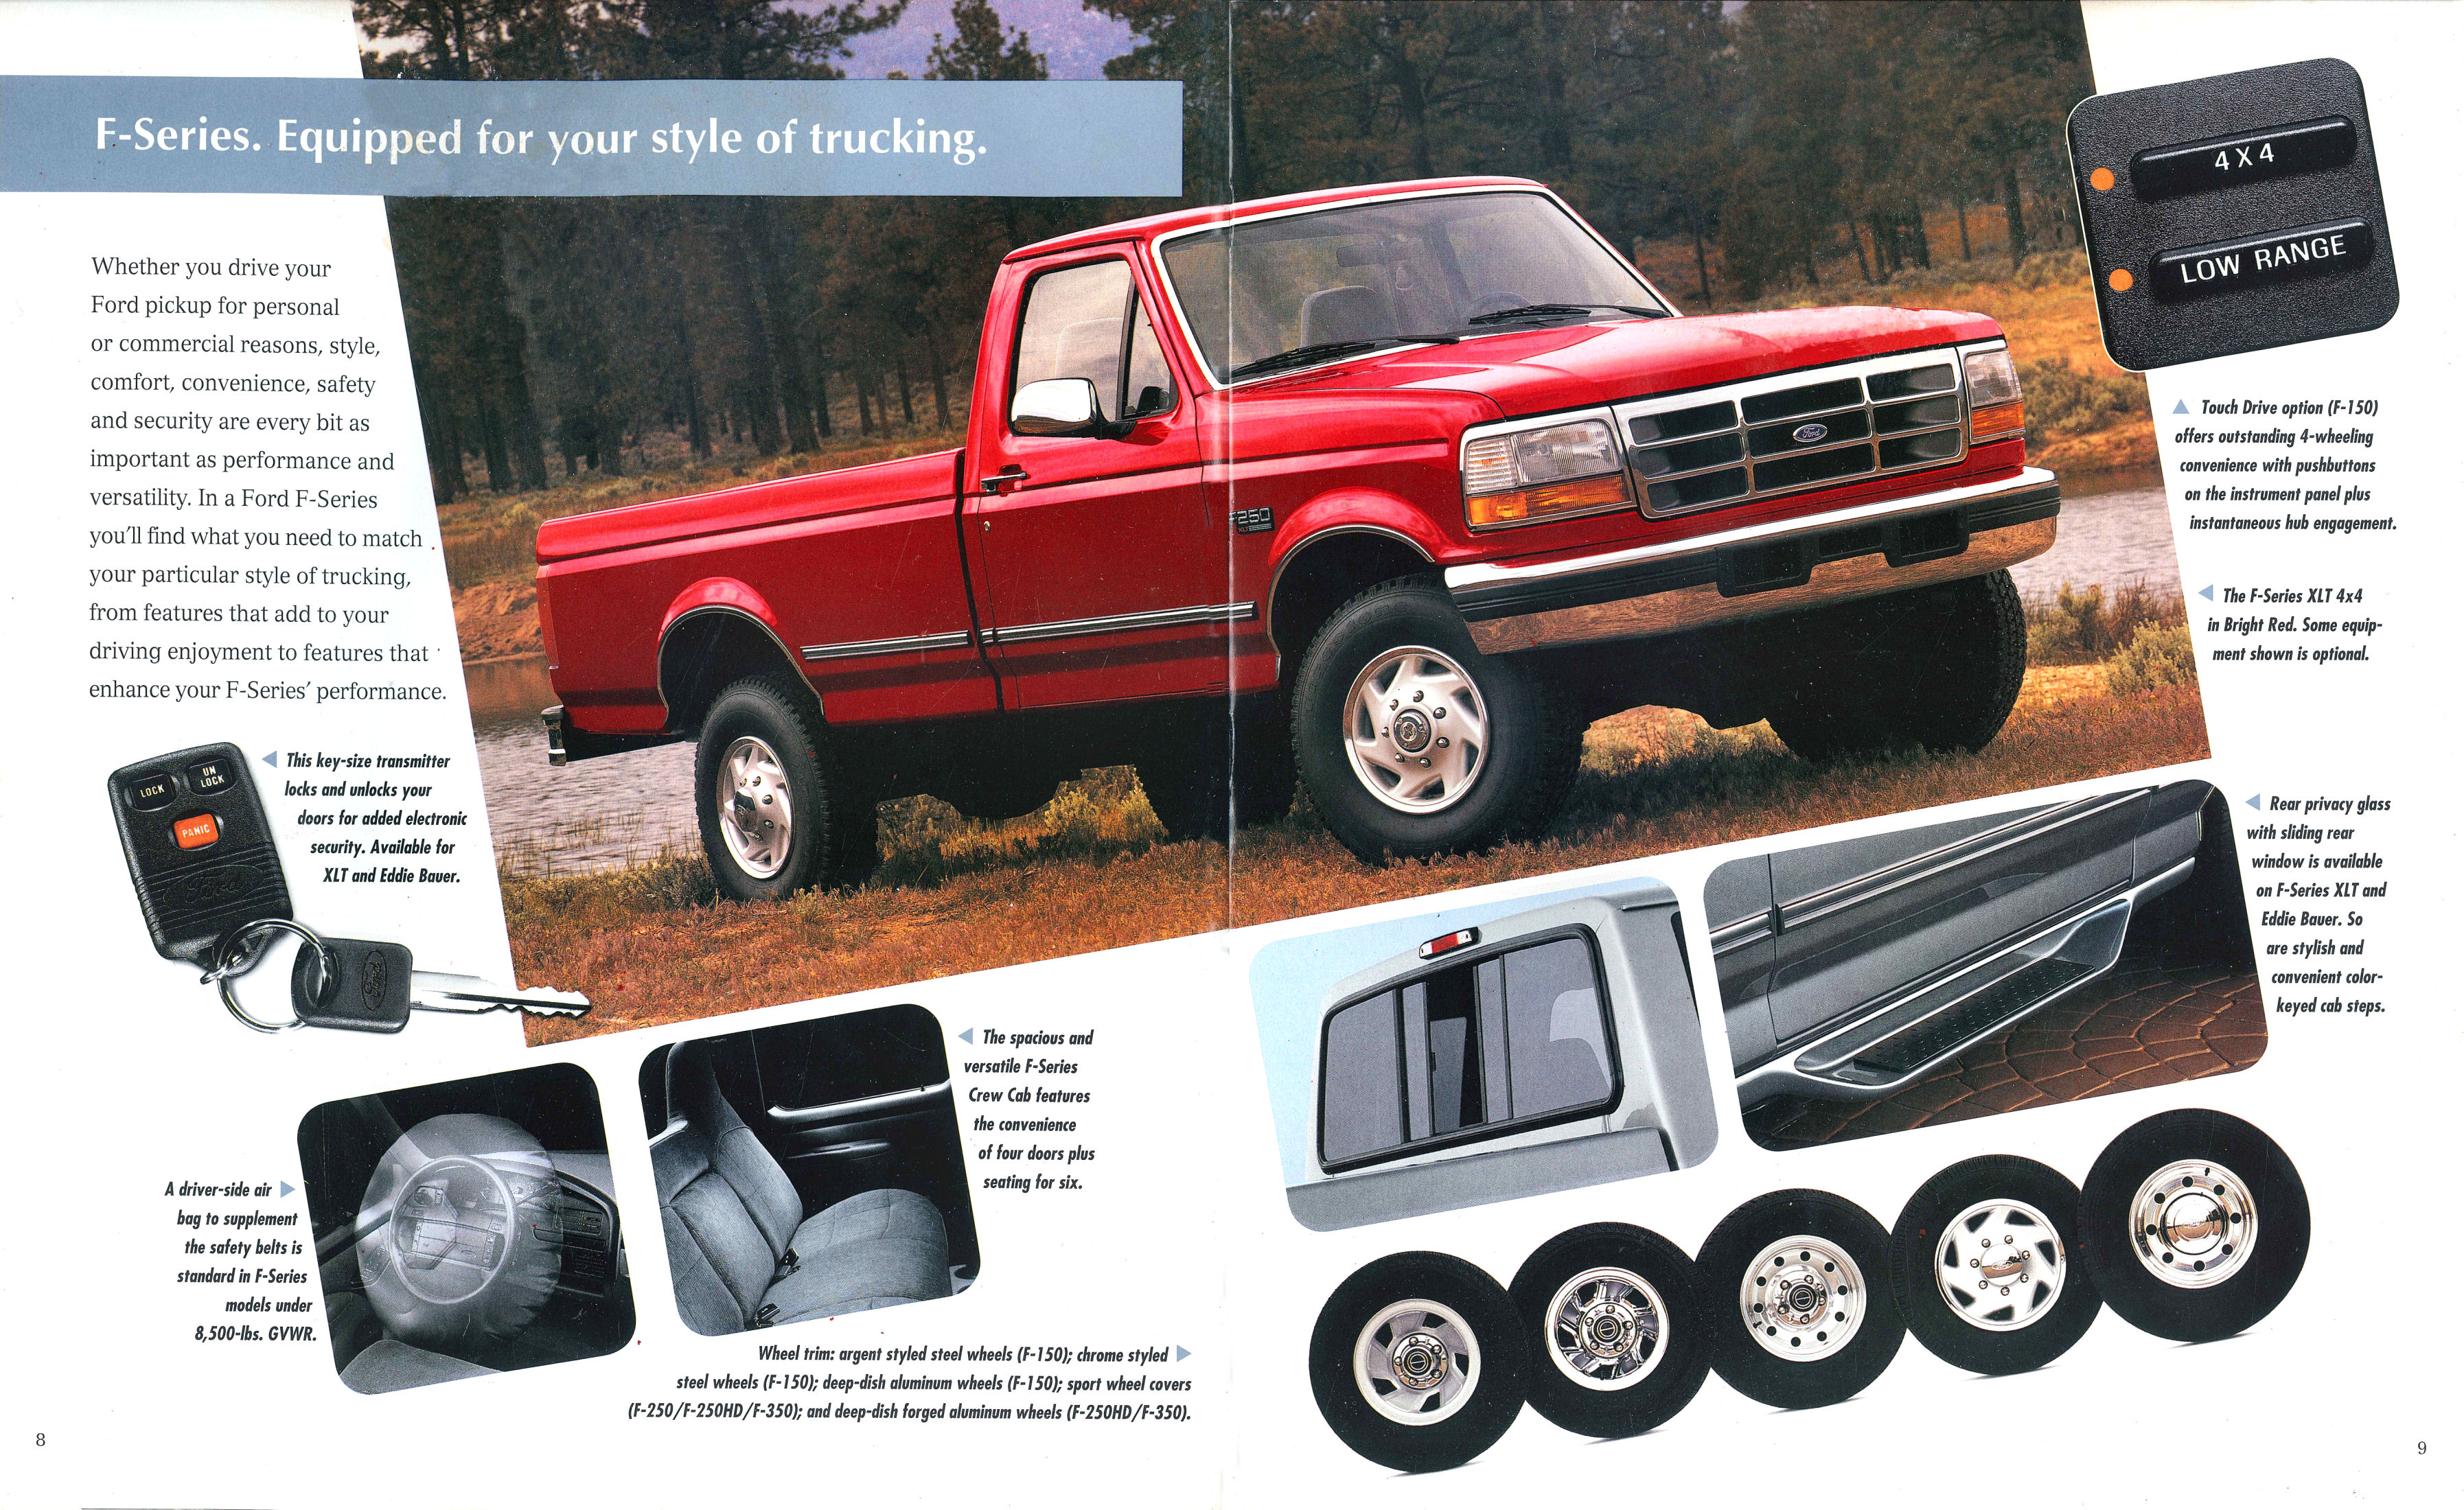 1996 Ford F-Series-08-09